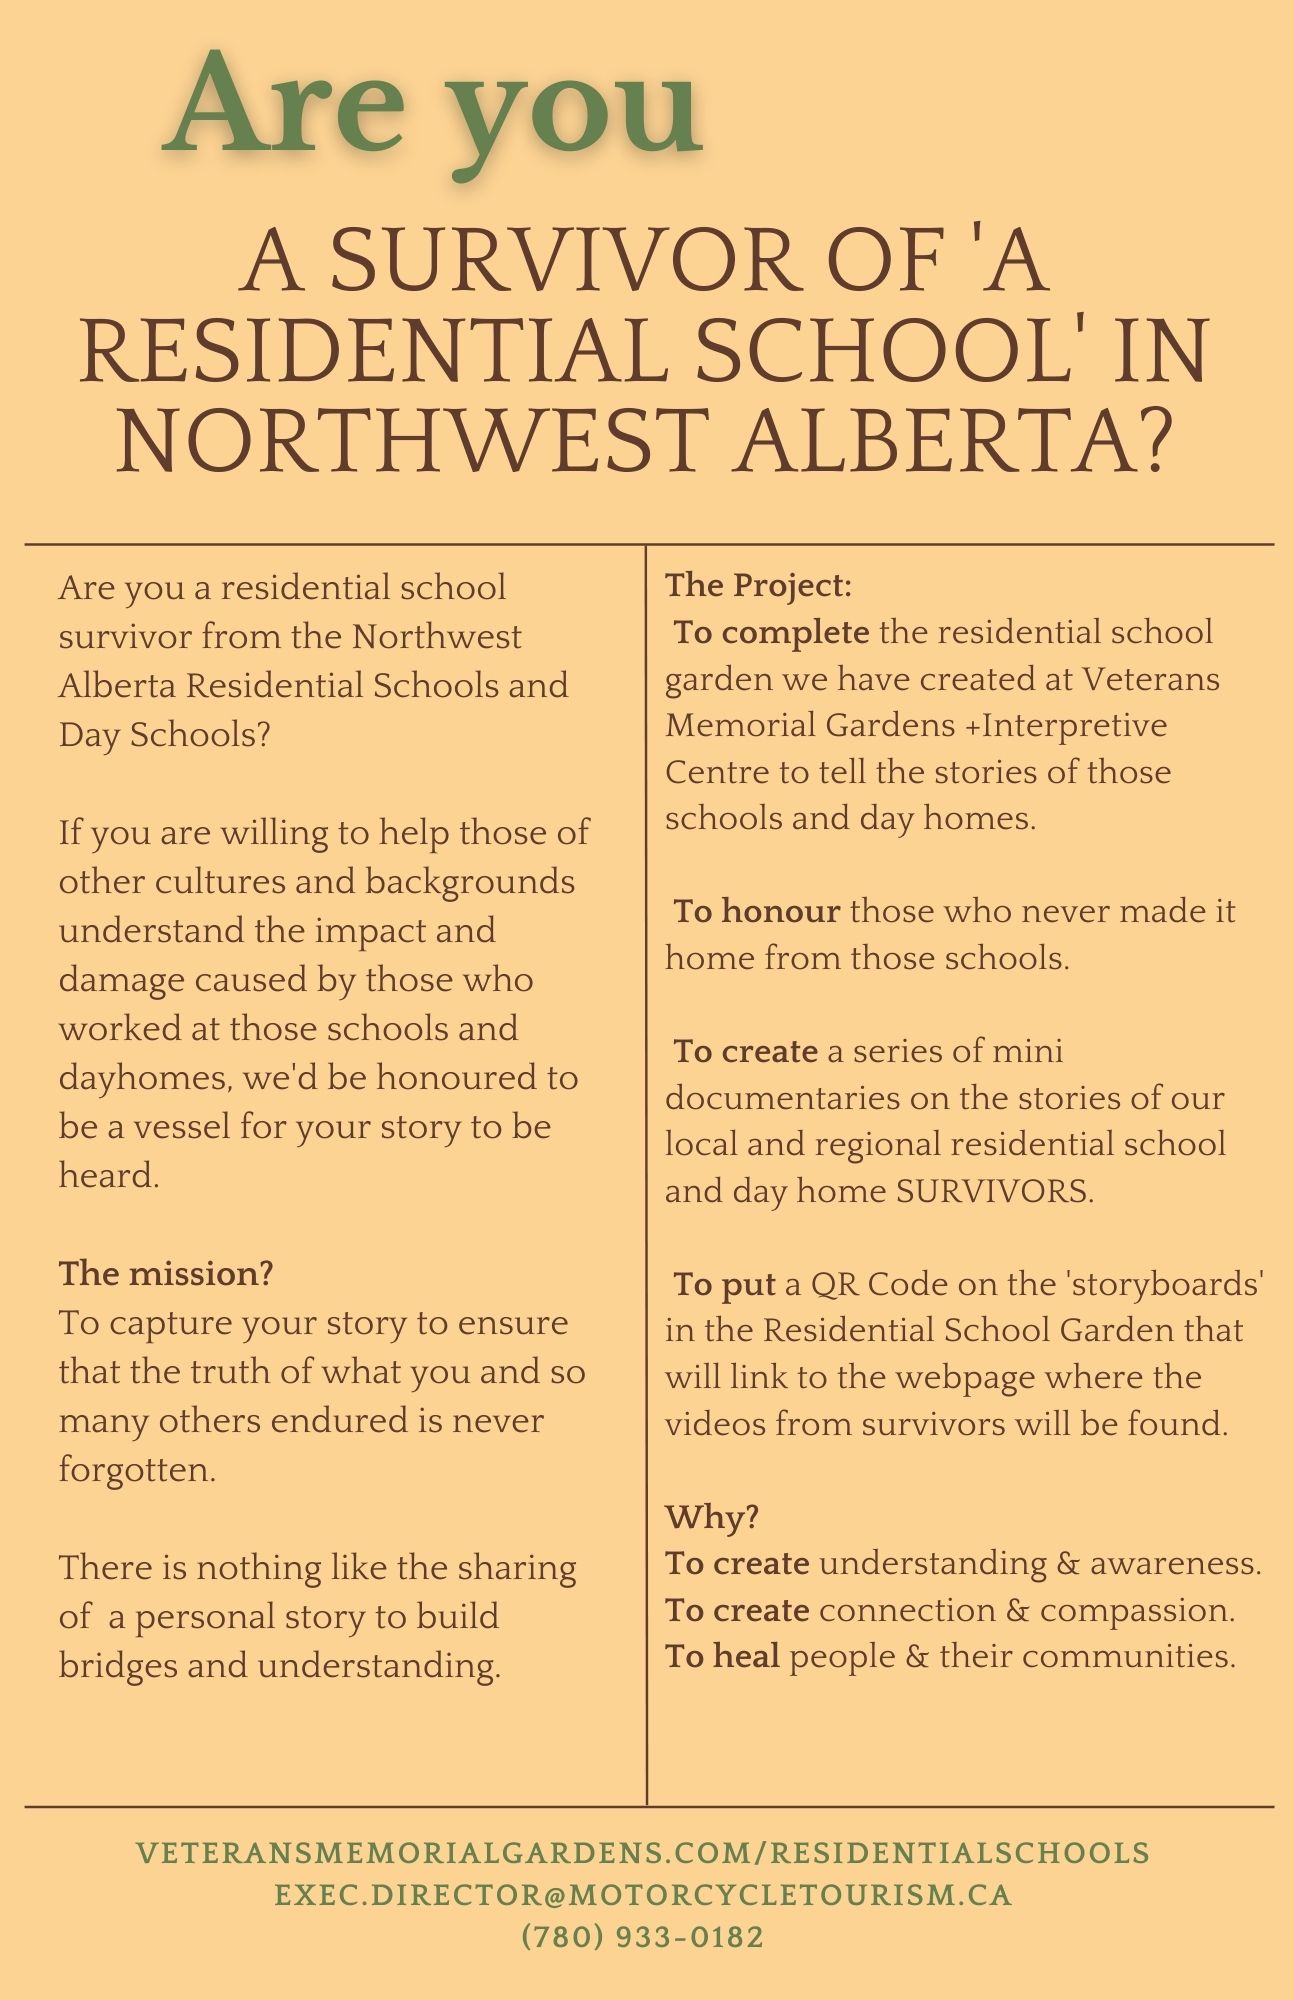 Are you a Survivor of a Residential School in NW Alberta?